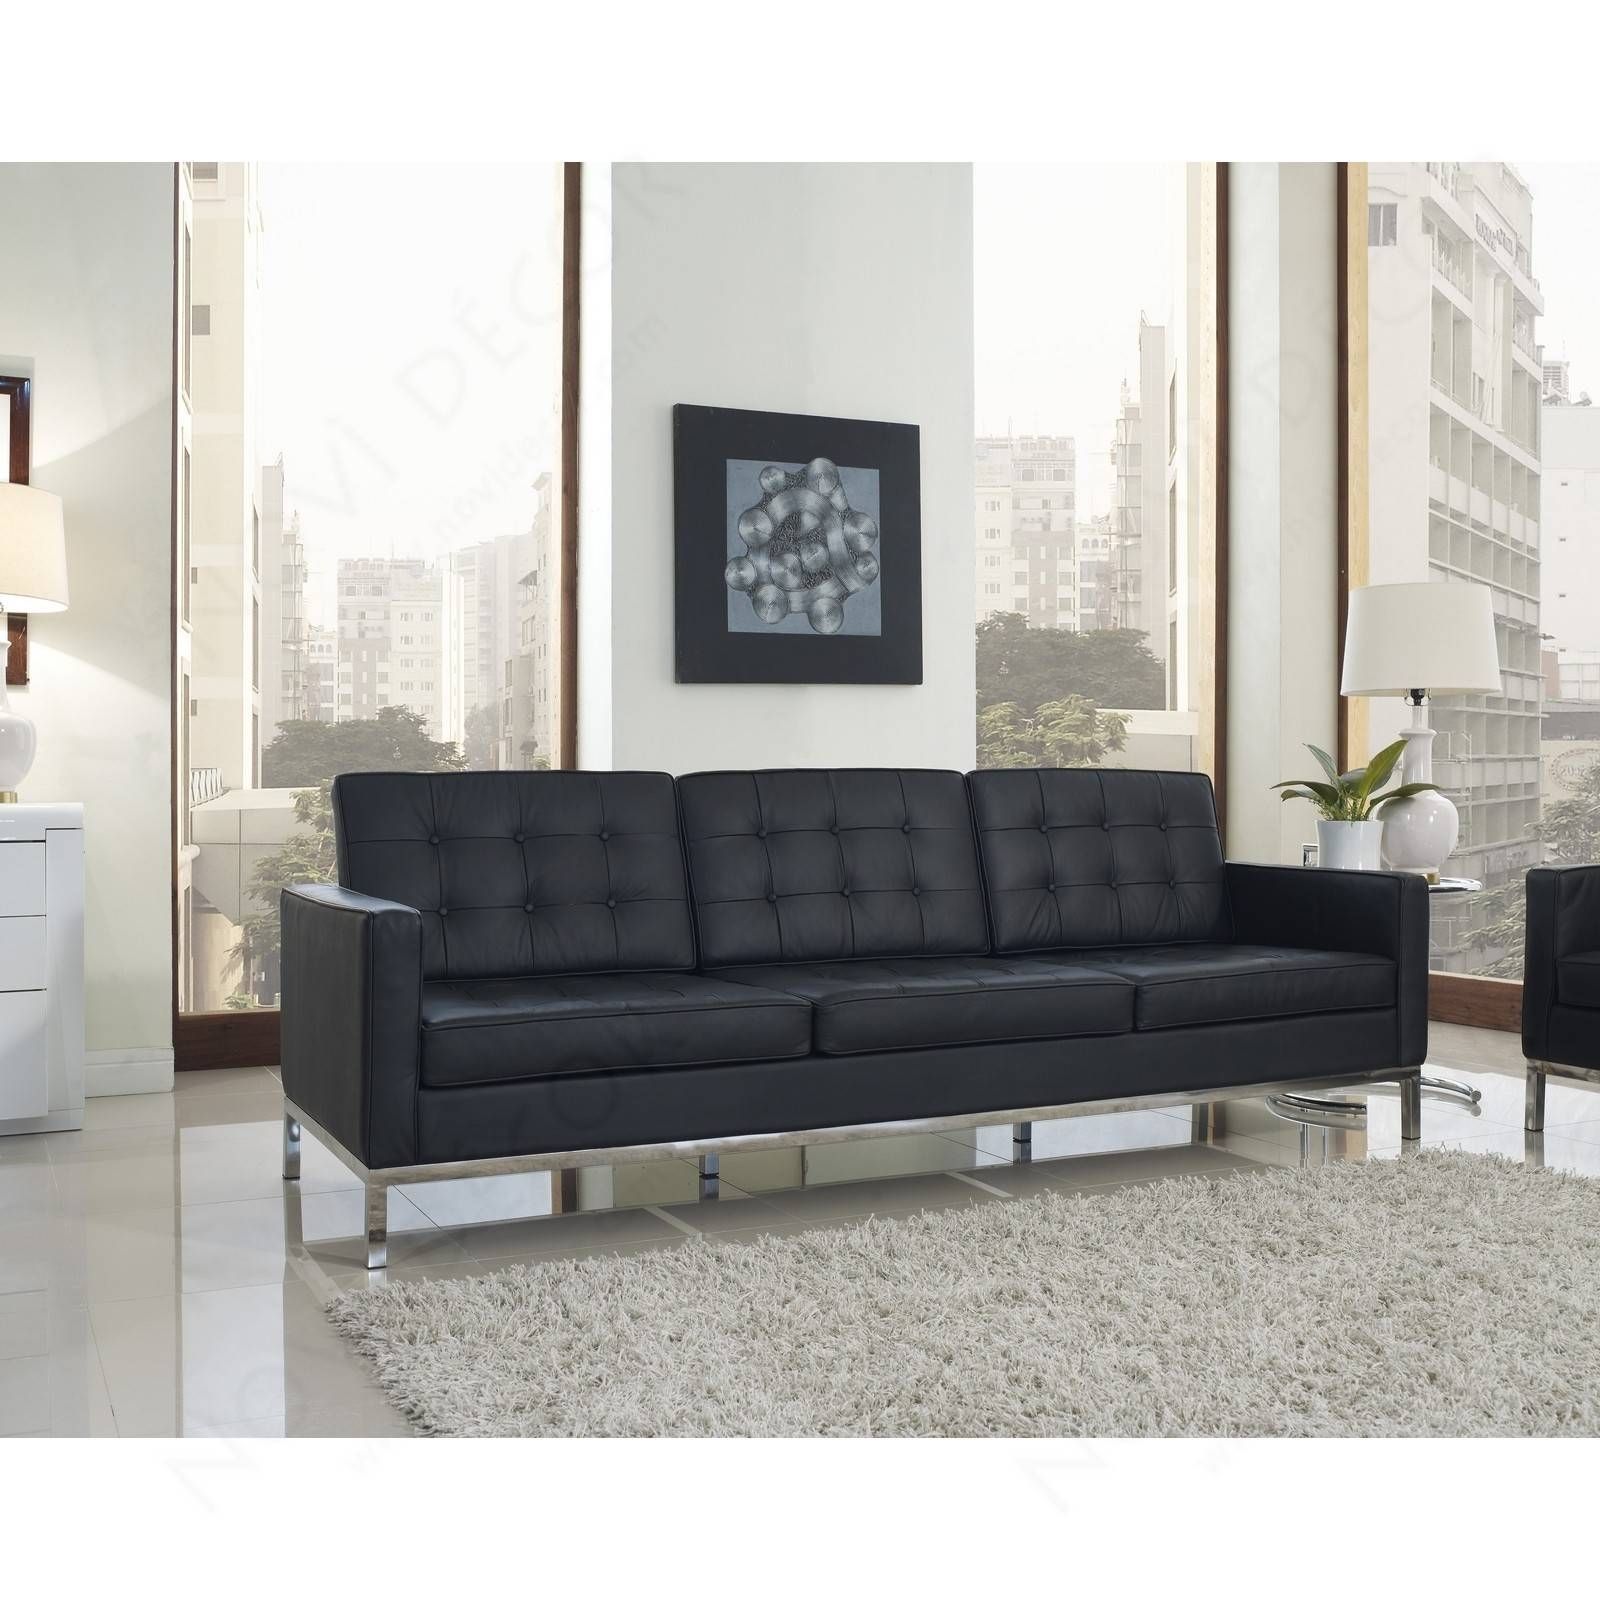 Sofas Center : Florence Knoll Sofa Leather And Chrome Plated Steel Inside Florence Knoll Leather Sofas (Photo 5 of 25)